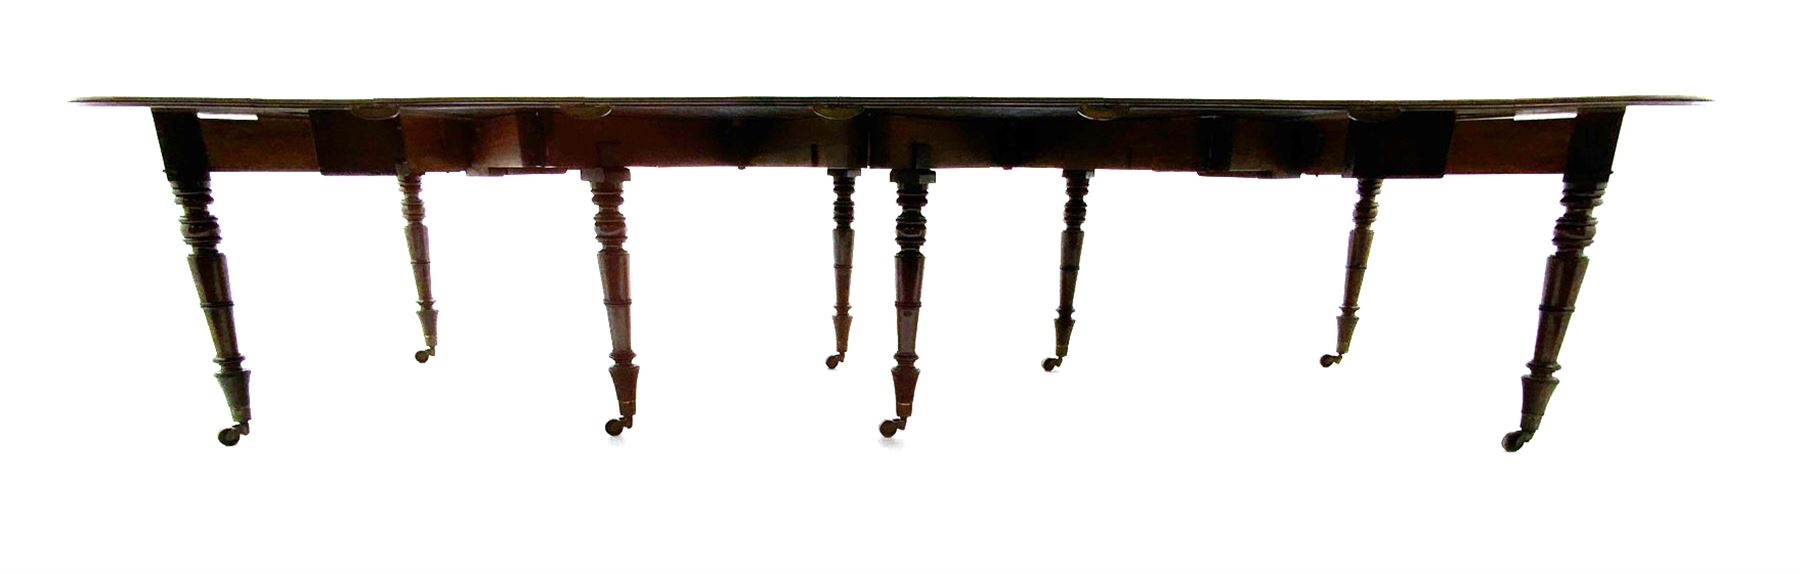 George III mahogany extending dining table - Image 2 of 6